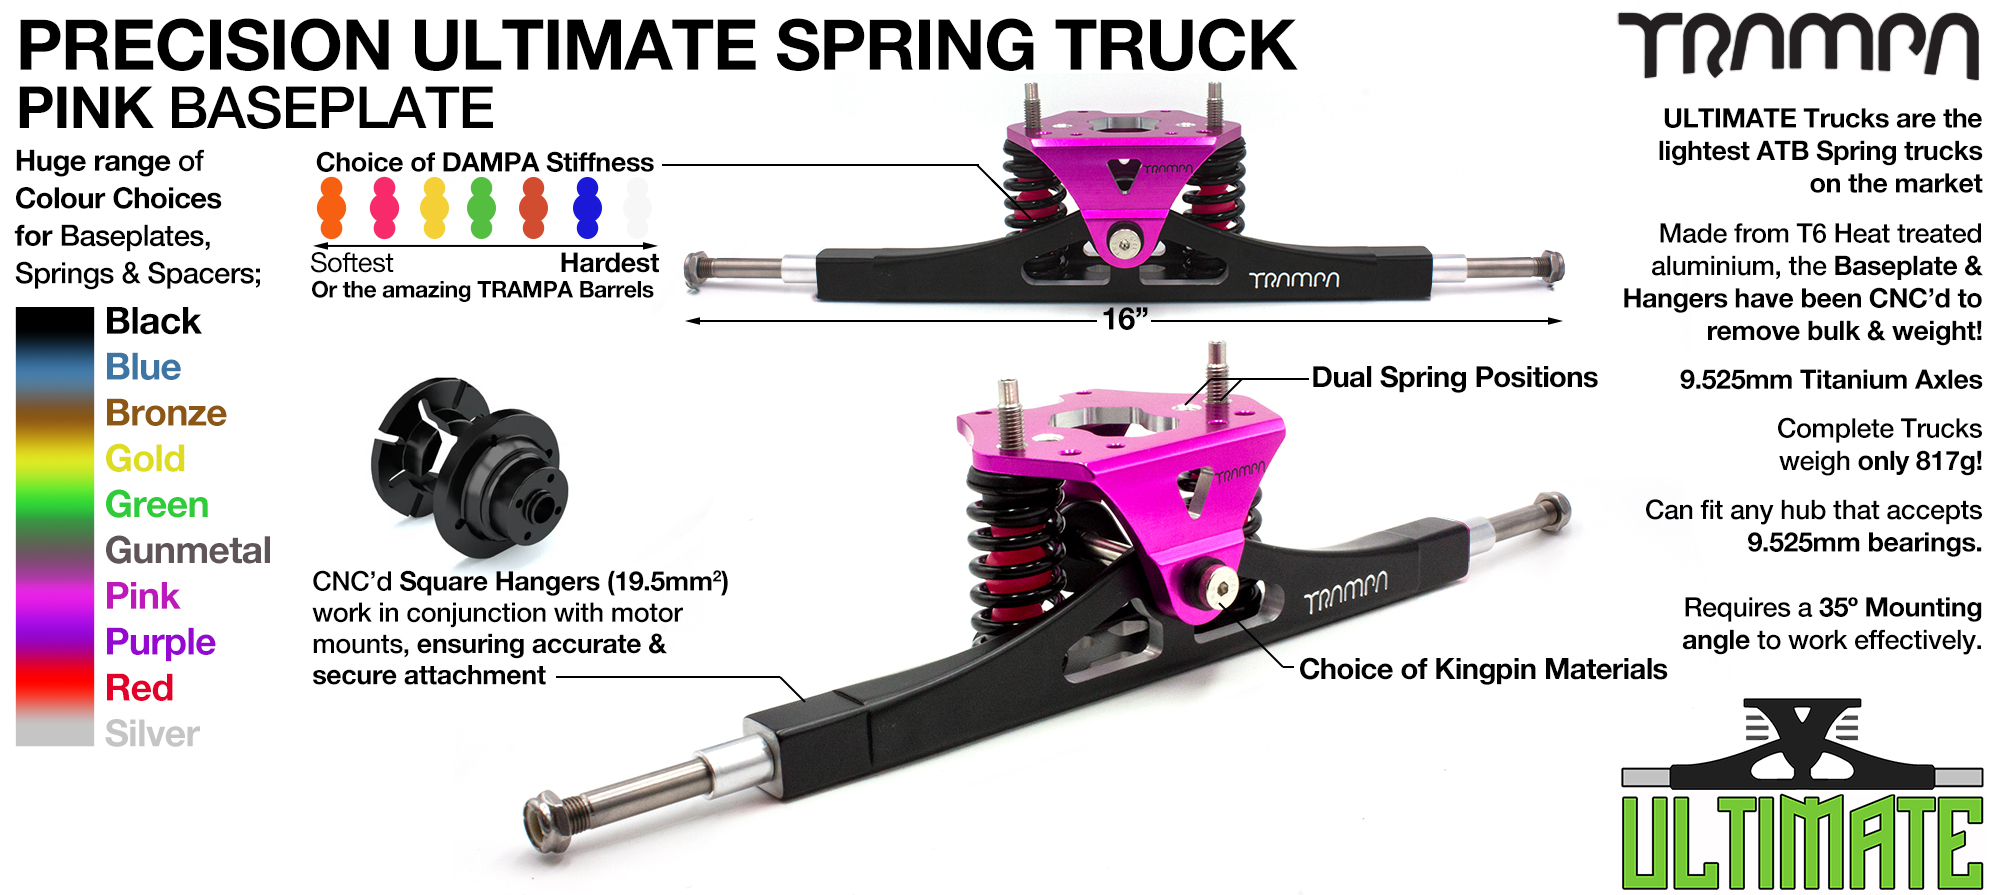 Precision CNC ULTIMATE ATB TRUCK with CNC Motor Mount fixing points, PINK Baseplate, TITANIUM Axles & Kingpin 